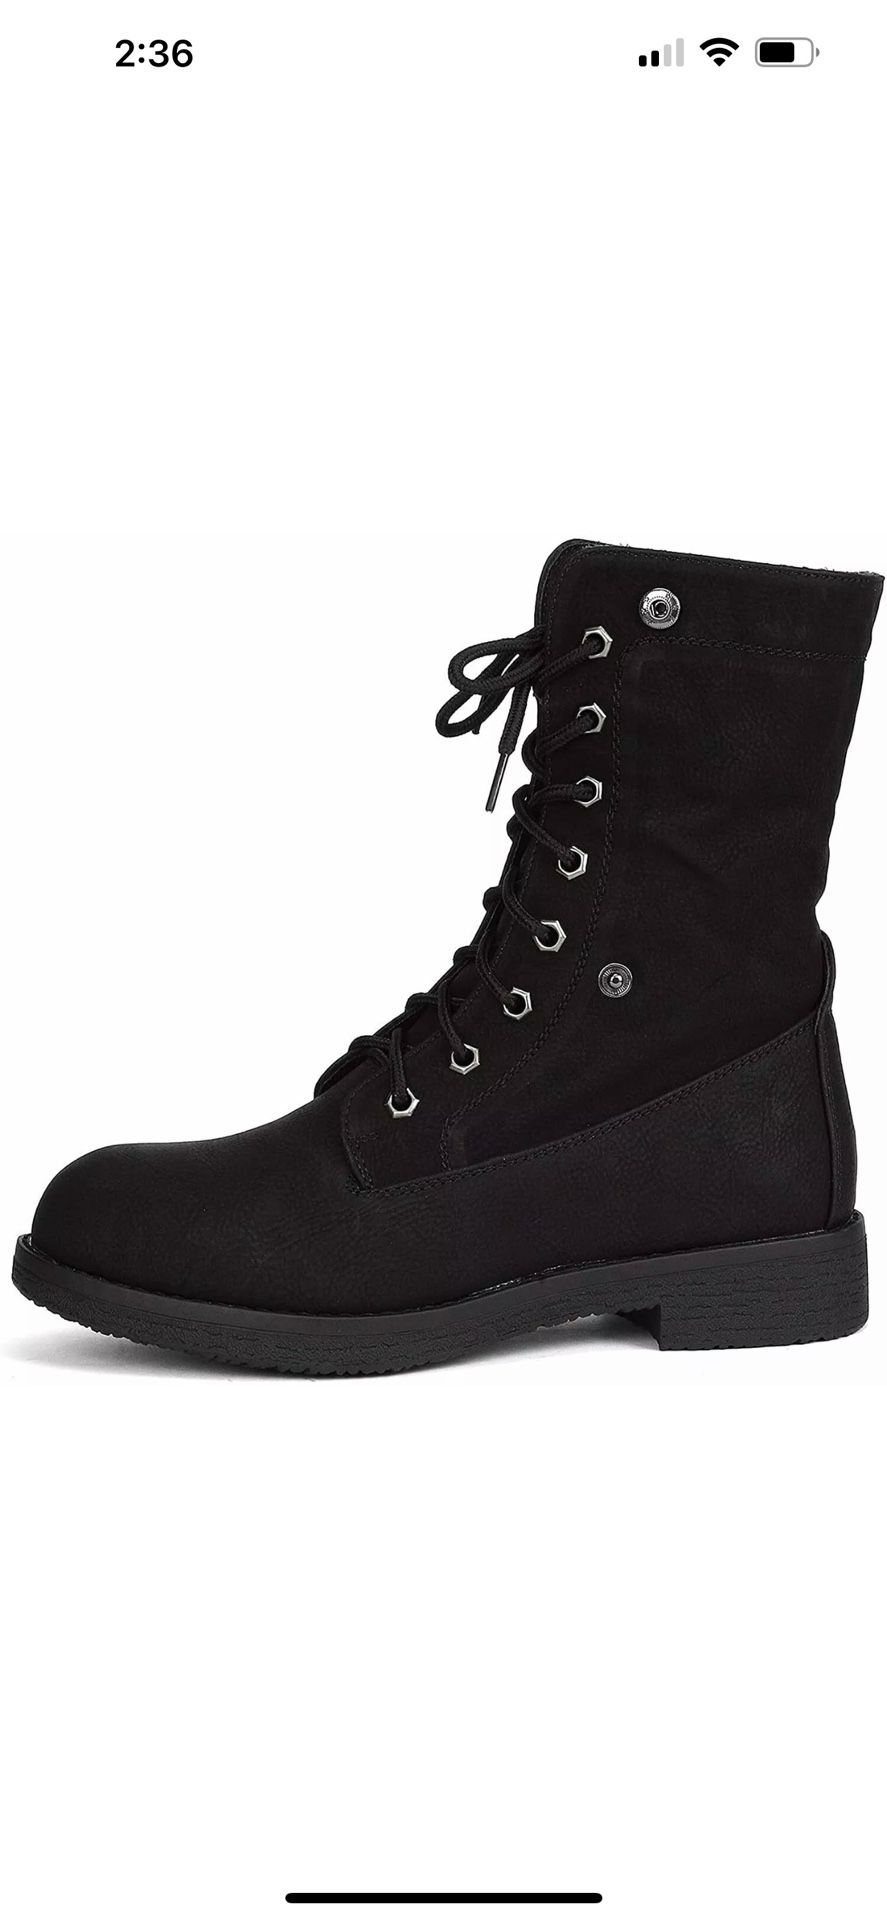 Women Winter Warm Snow Boots Fur-lining Lace Up Combat Boots Ankle Boots US SIZE